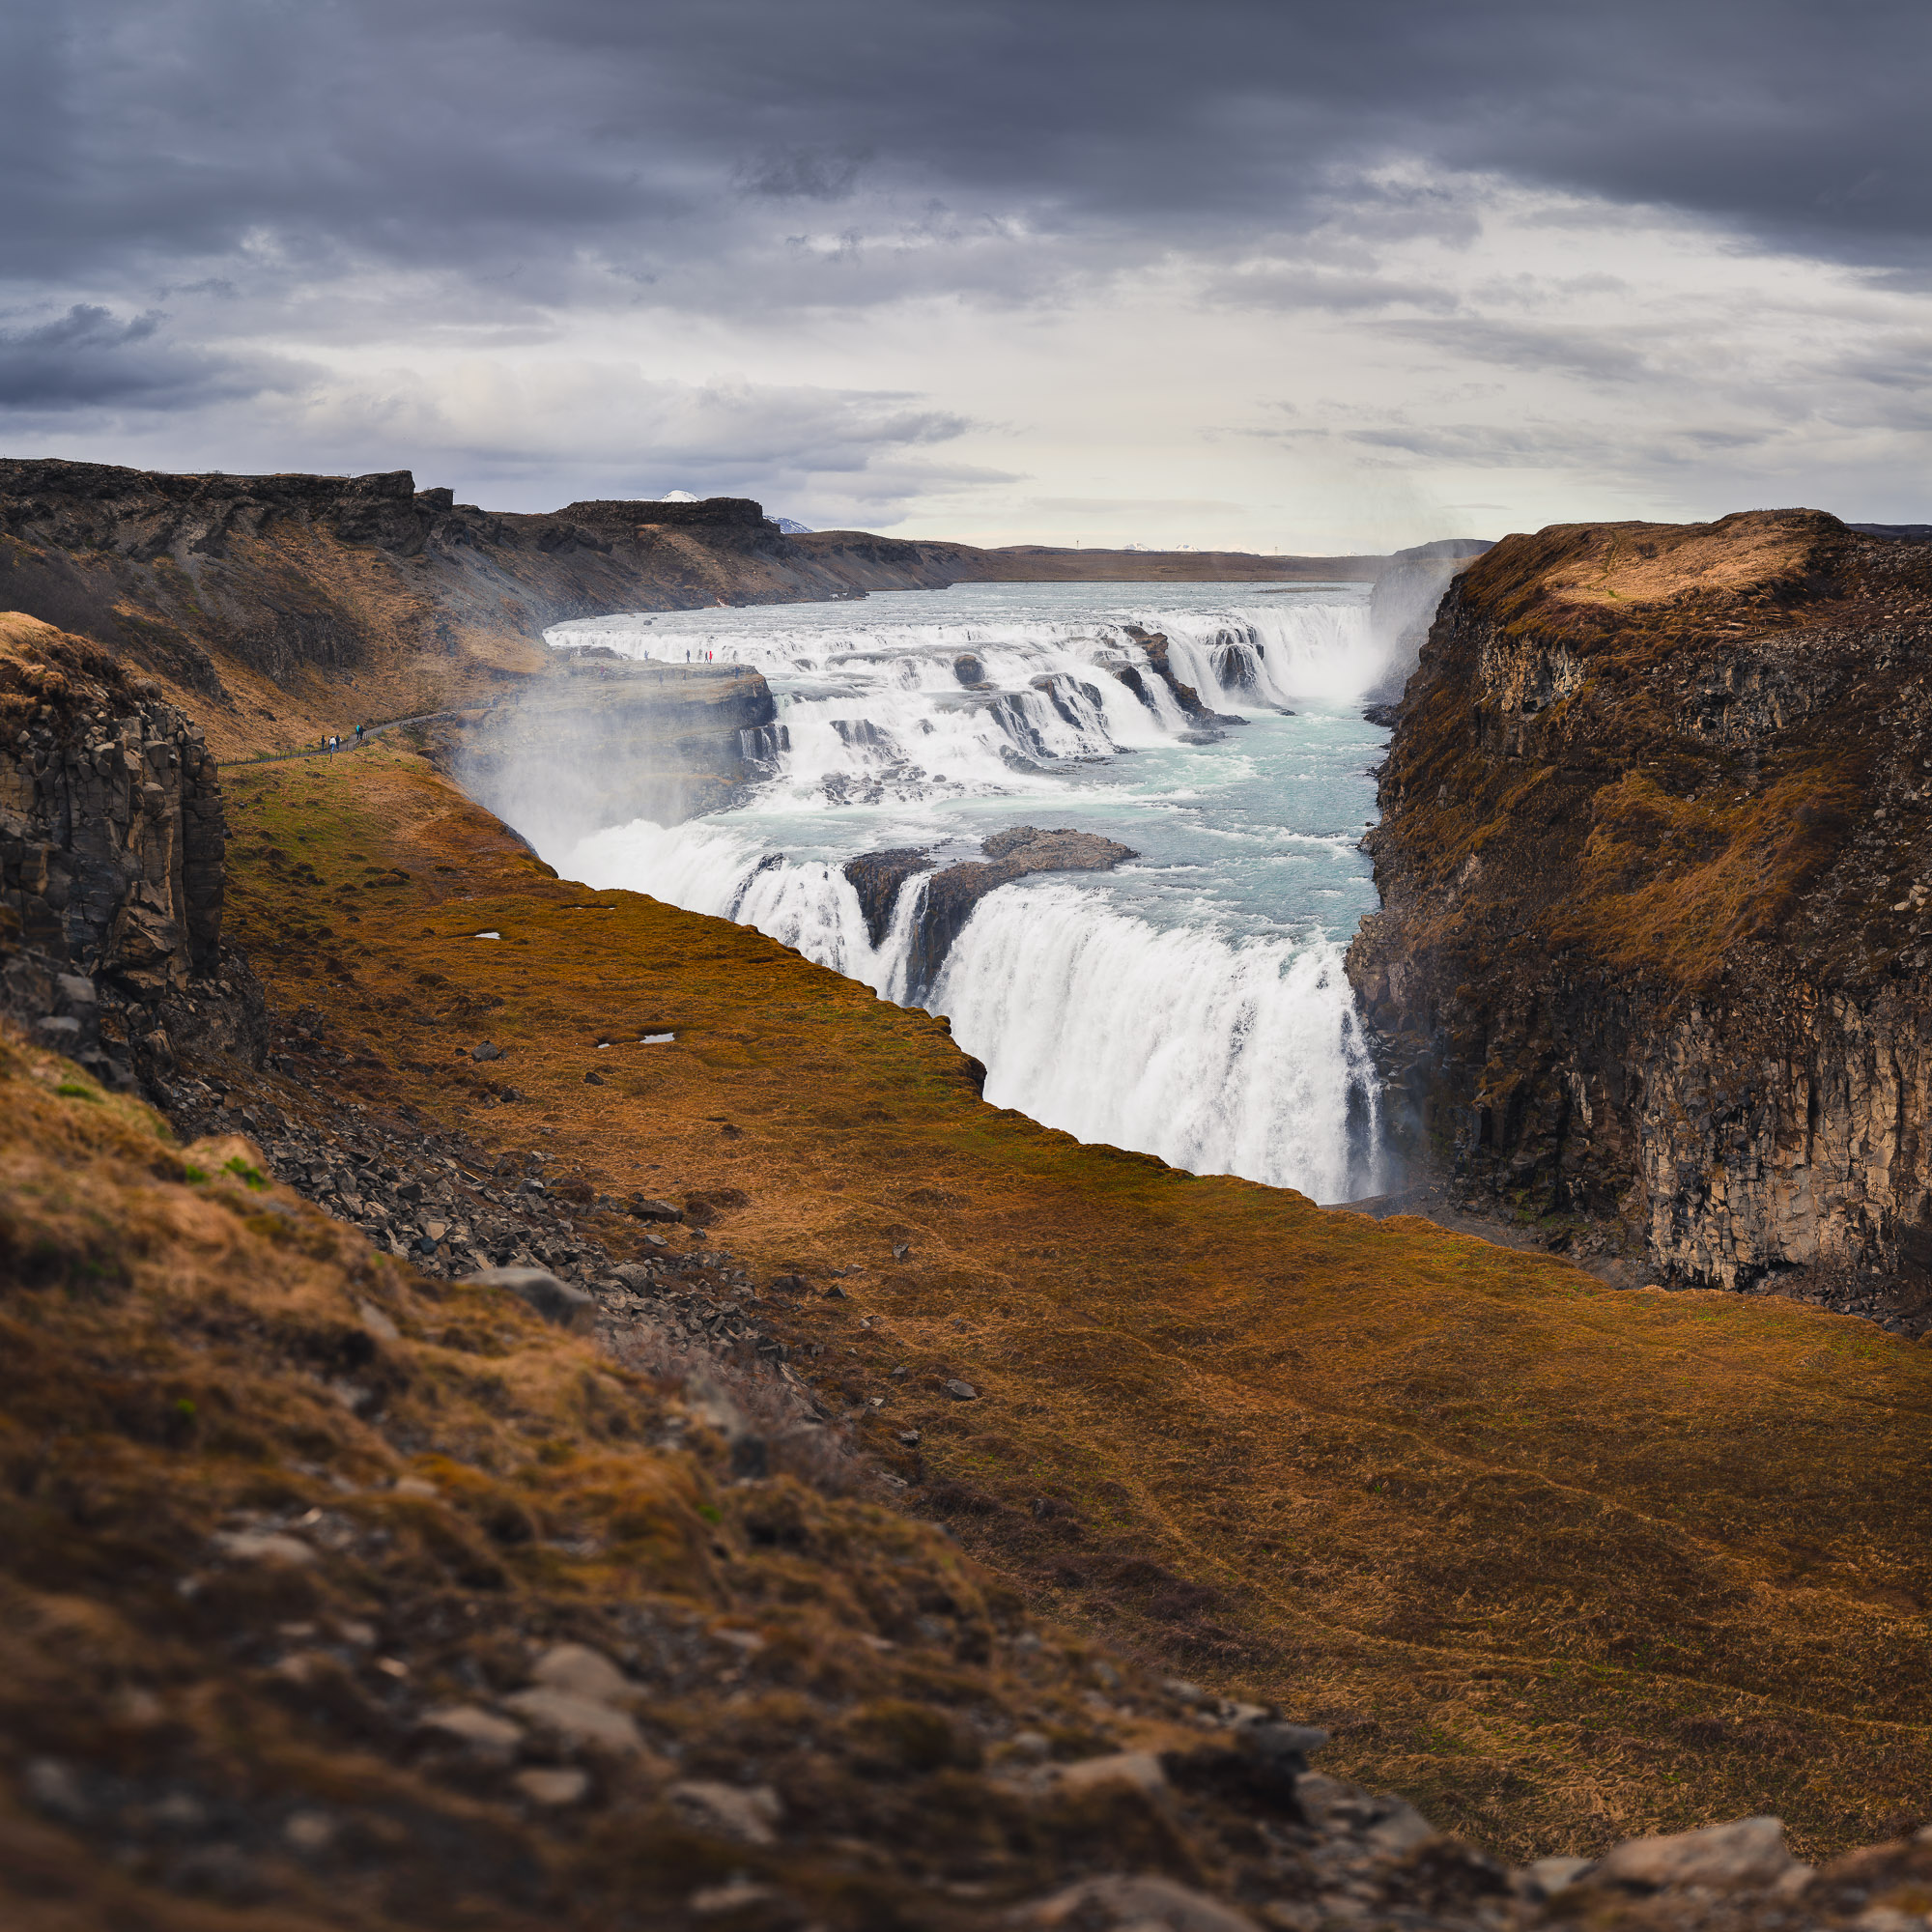 Gullfoss, Iceland. 35 frame panorama, 178 megapixels, Sigma 105mm f/1.4 @ f/2.8, 1/1600th, ISO 100